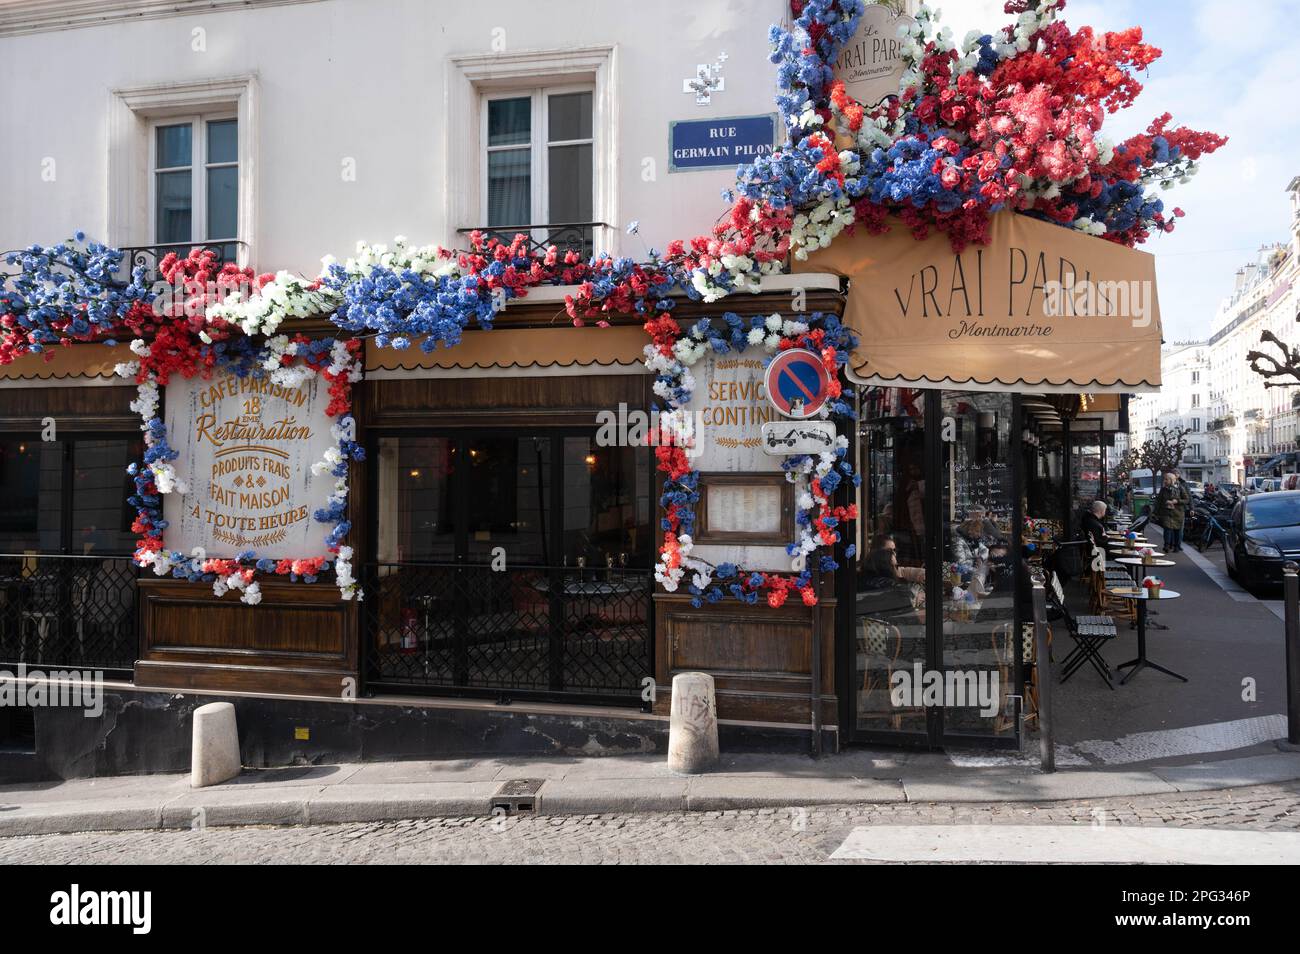 Le Vrai Paris, bistro in Rue des Abbesses, Montmartre, Paris decorated in flowers of the French flag Stock Photo